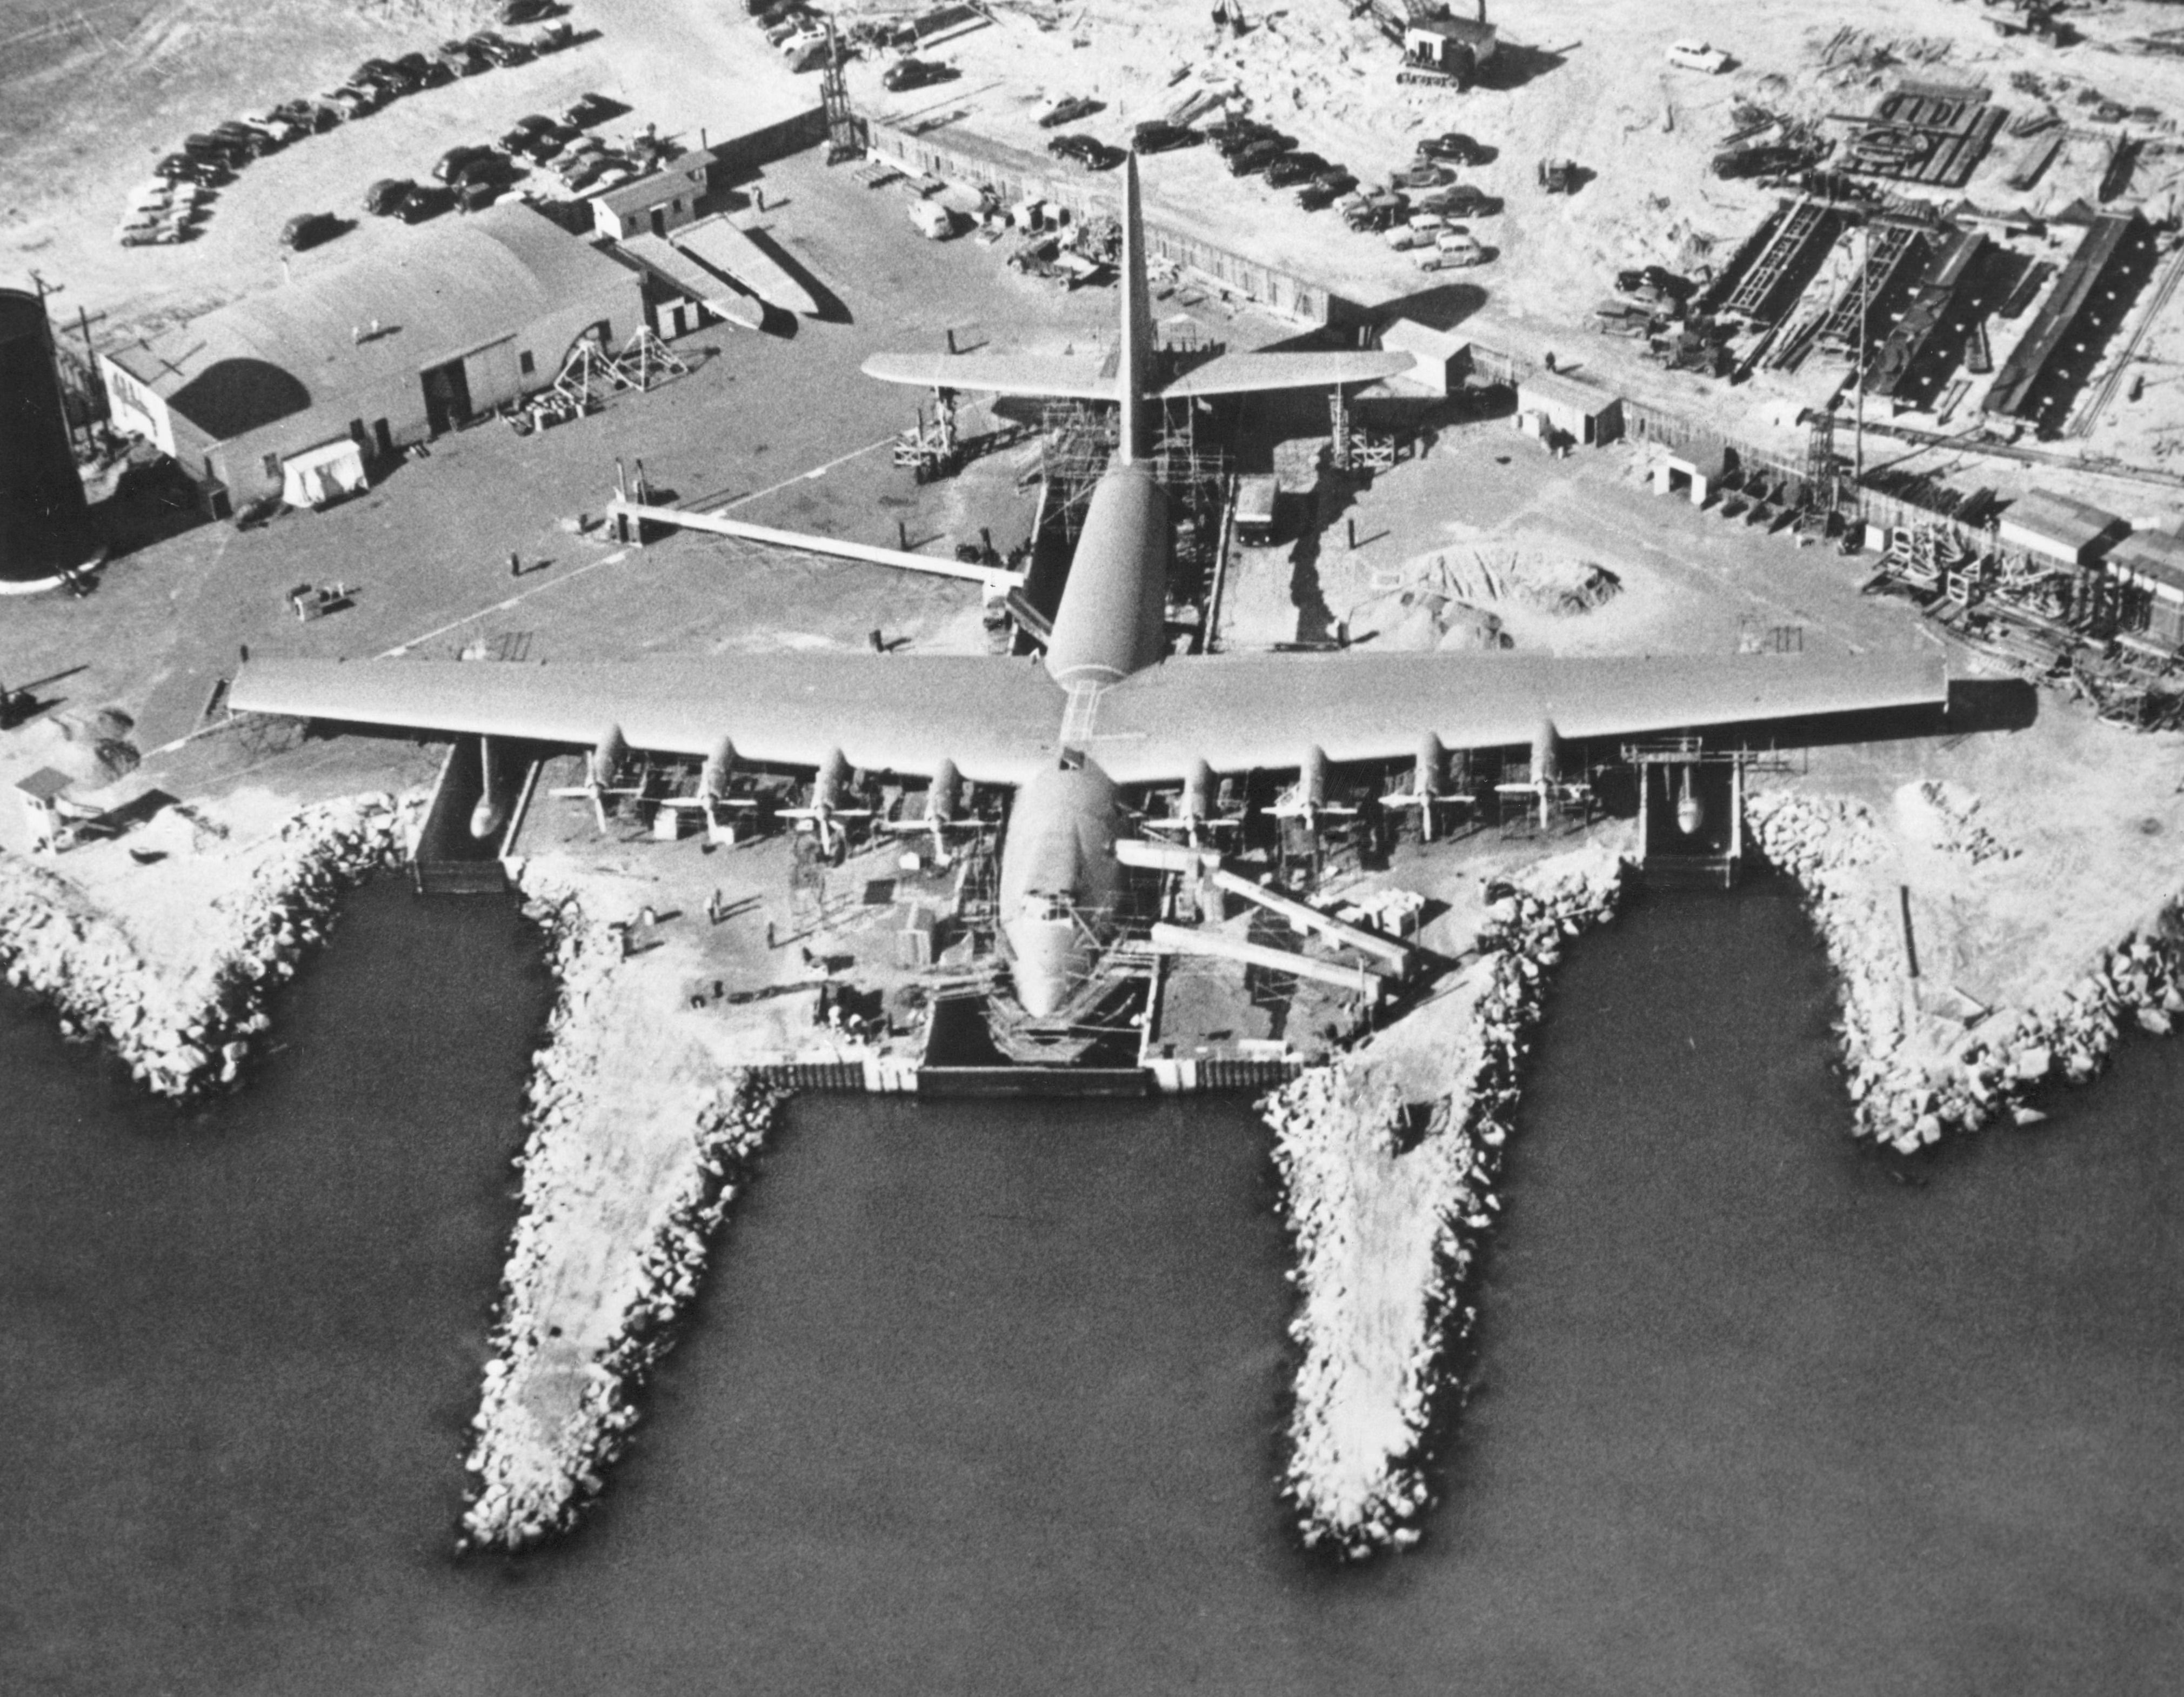 The Spruce Goose Berthed In Its Pier